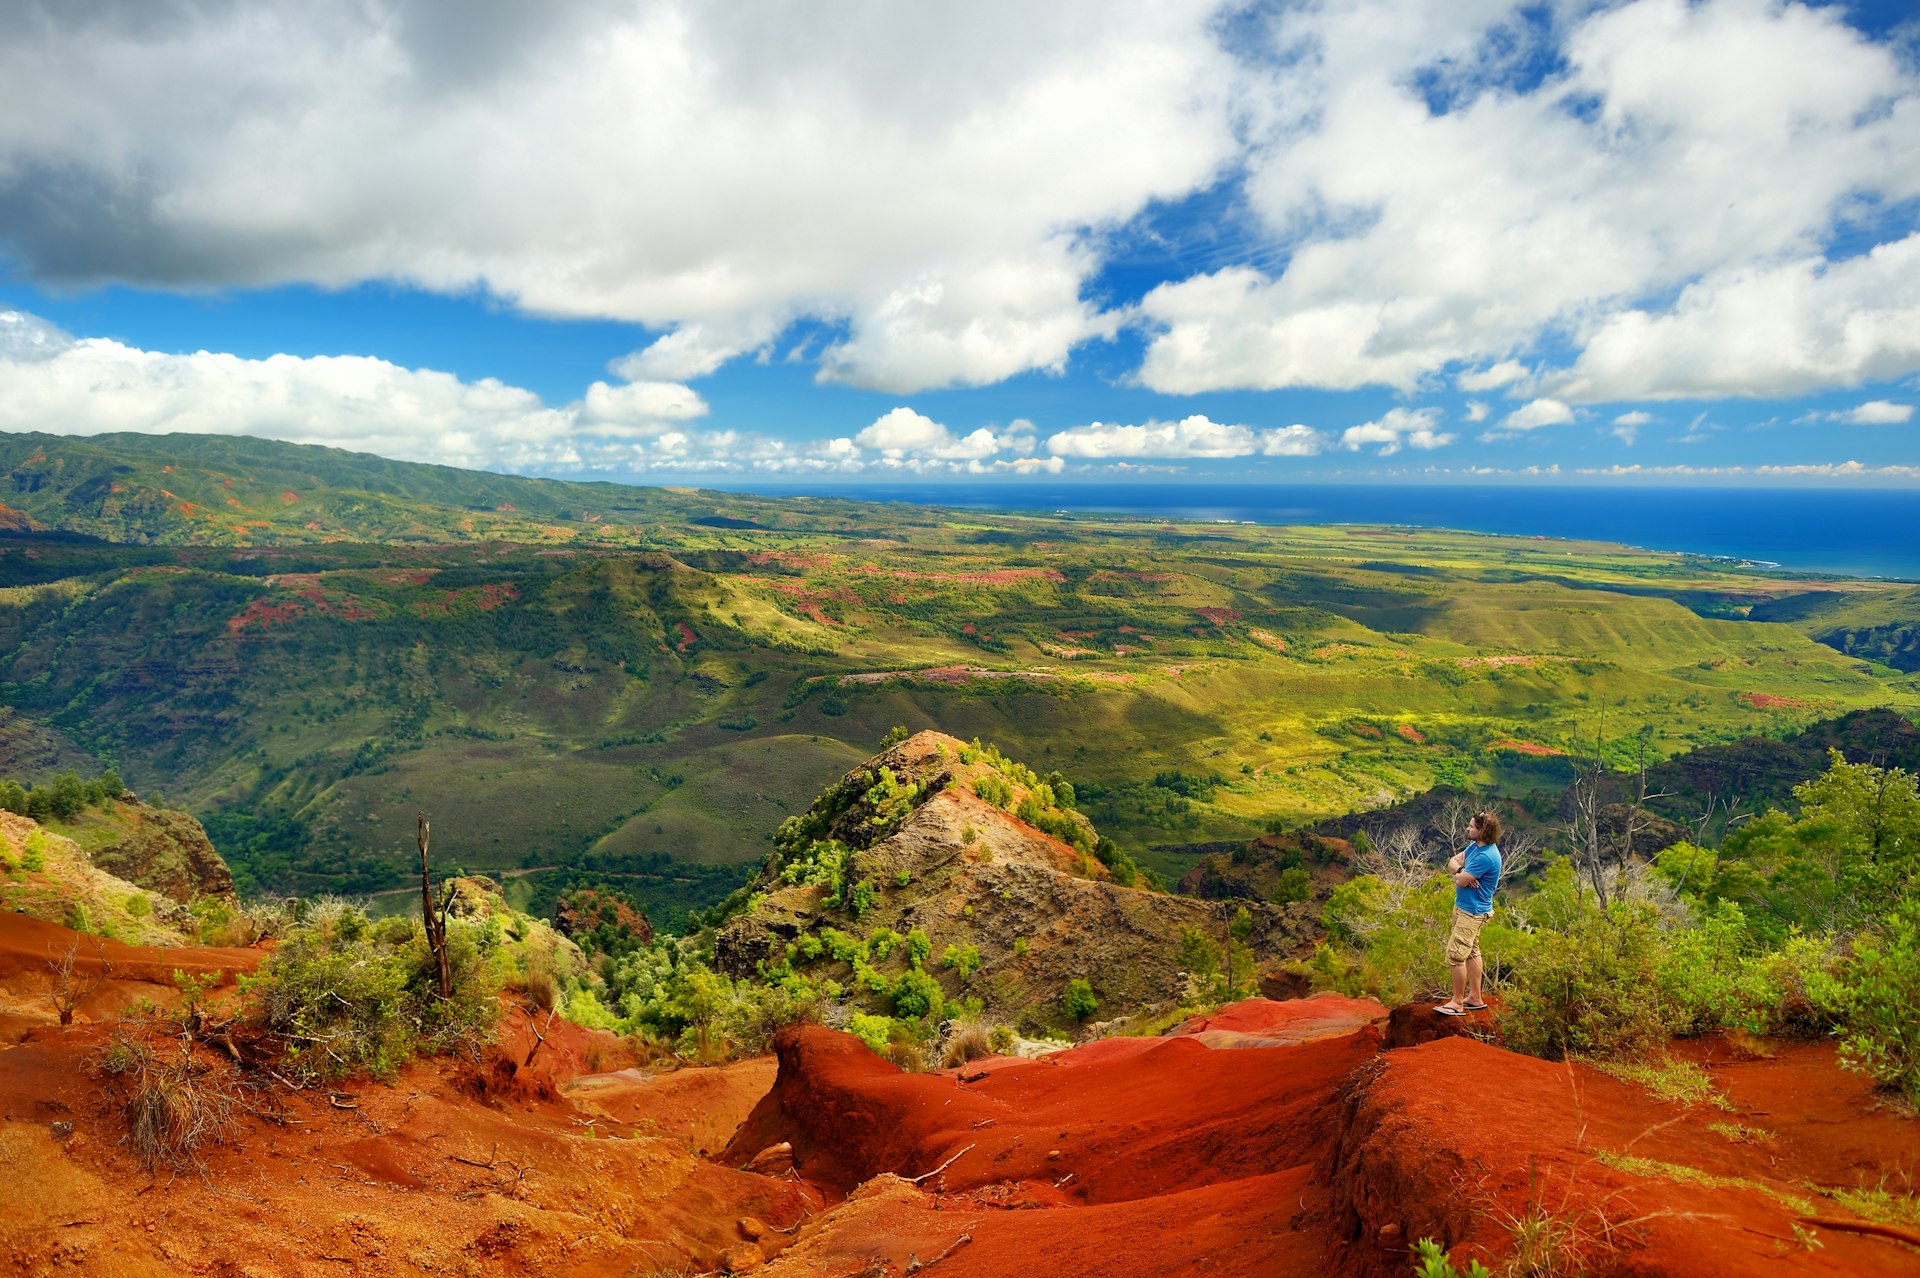 A man gazes out on a red and green canyon landscape that stretches out to the blue of the ocean